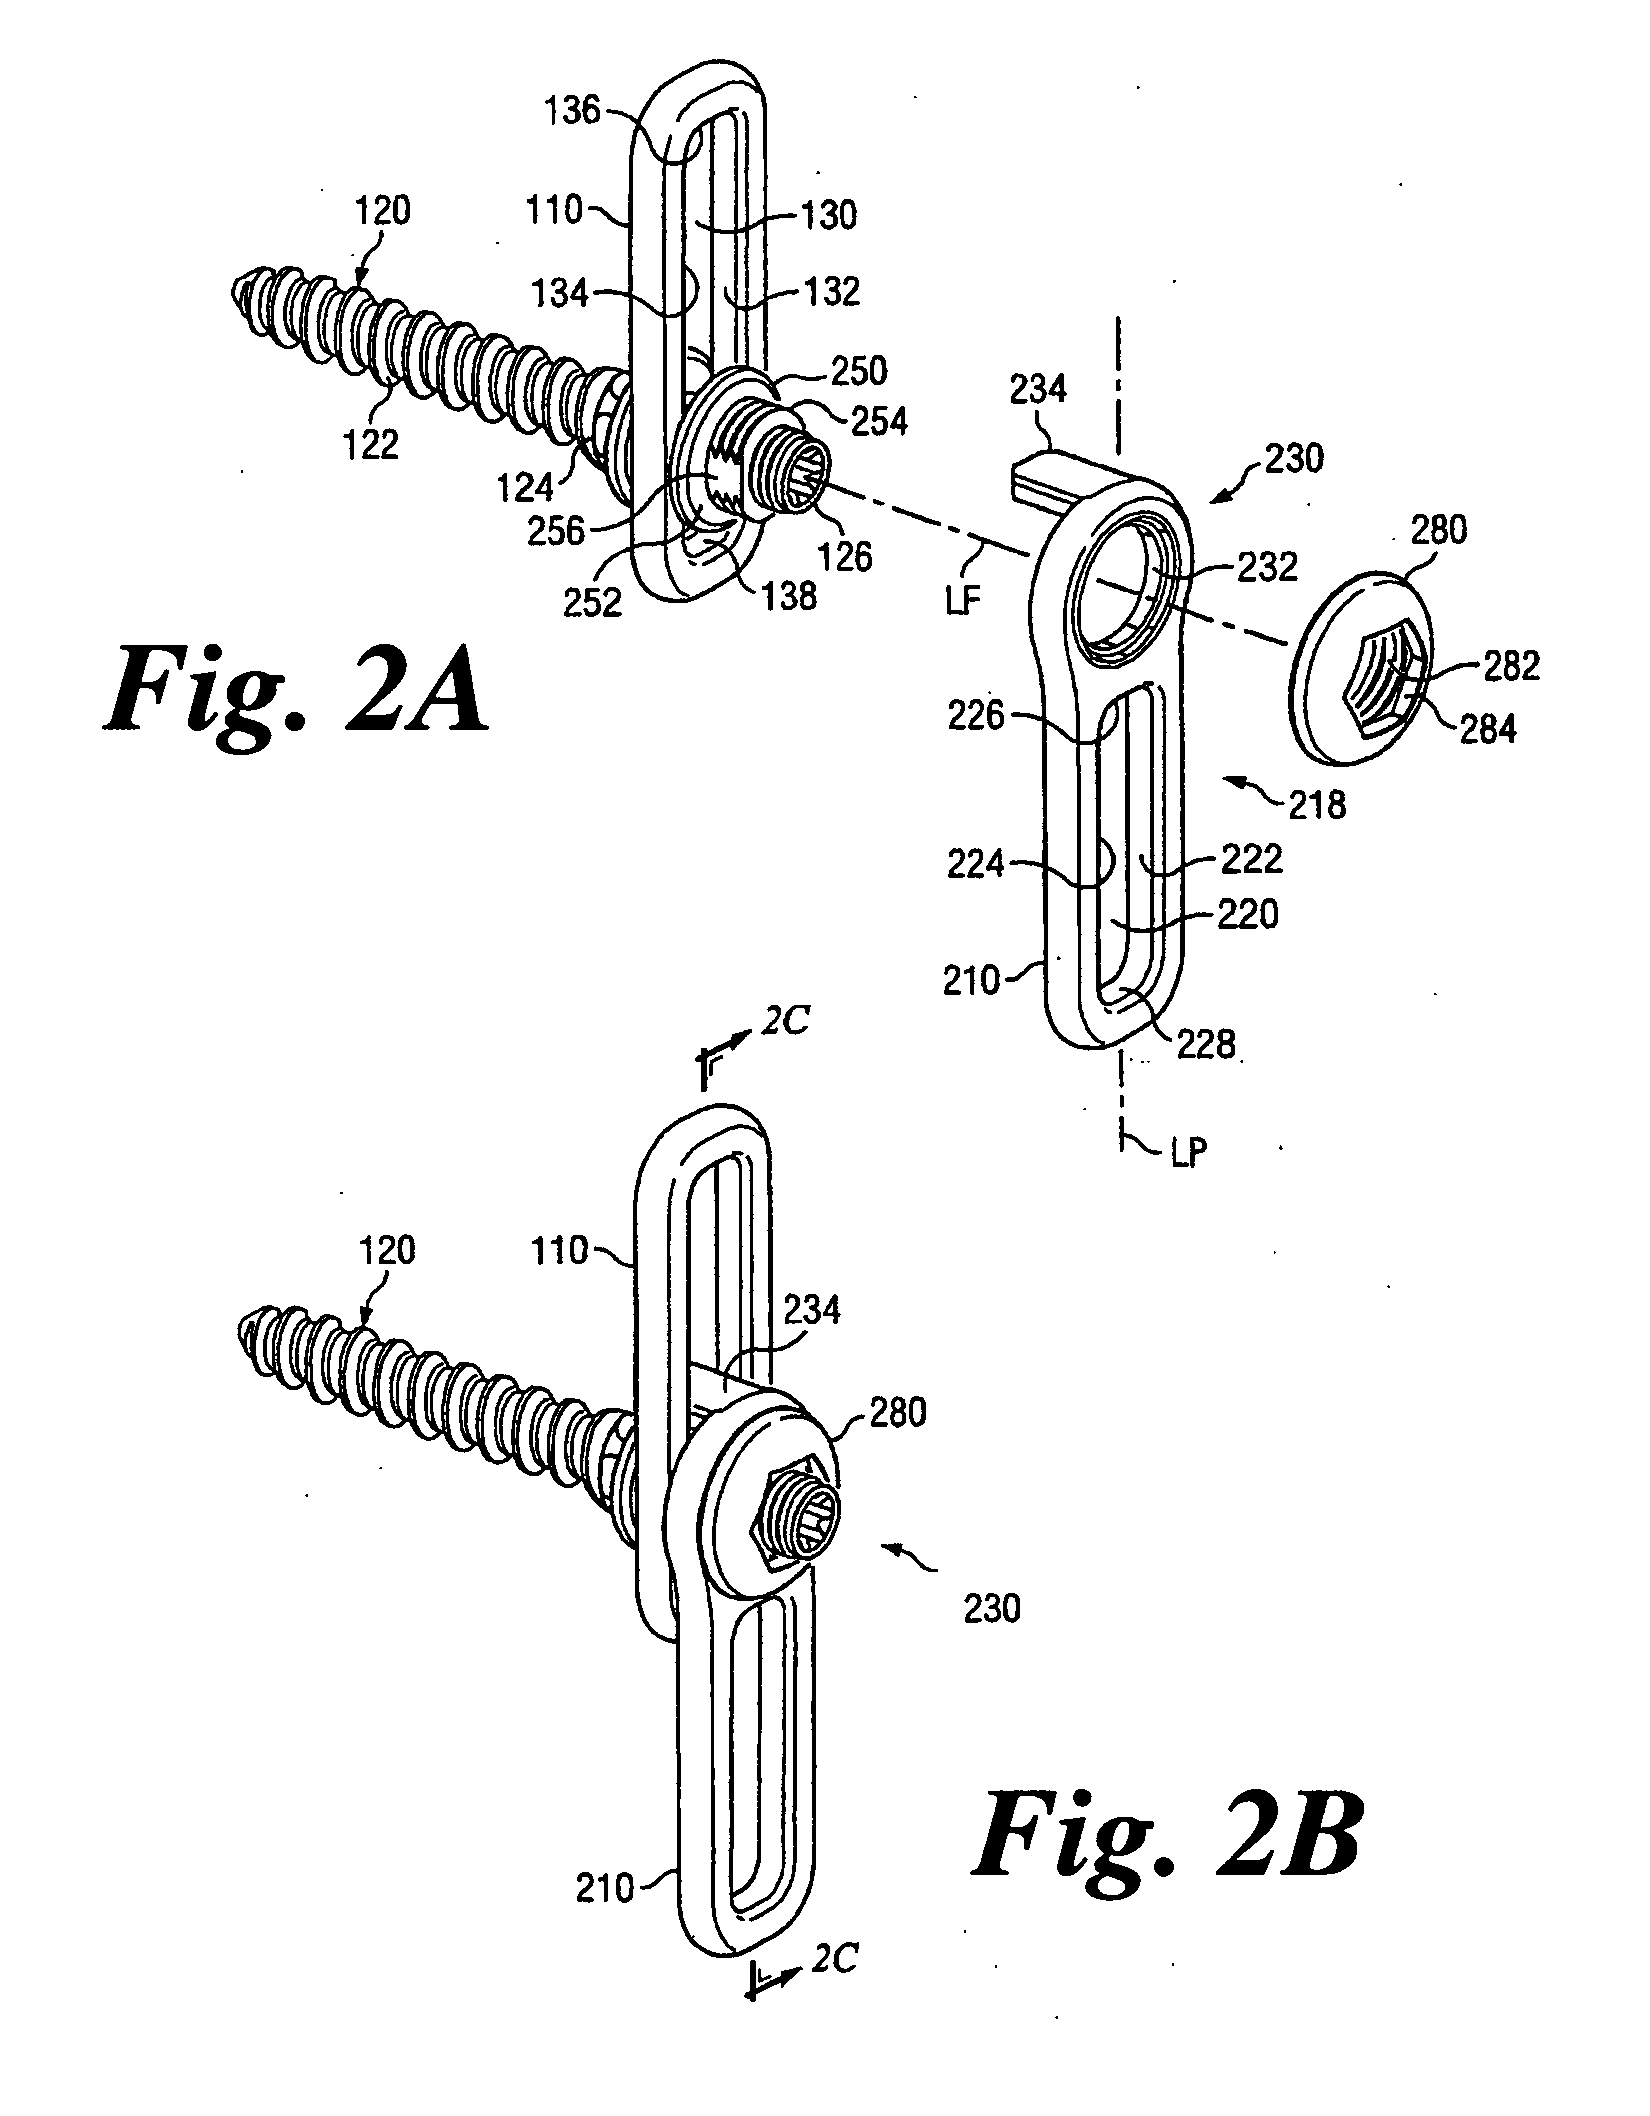 Revision Fixation Plate and Method of Use